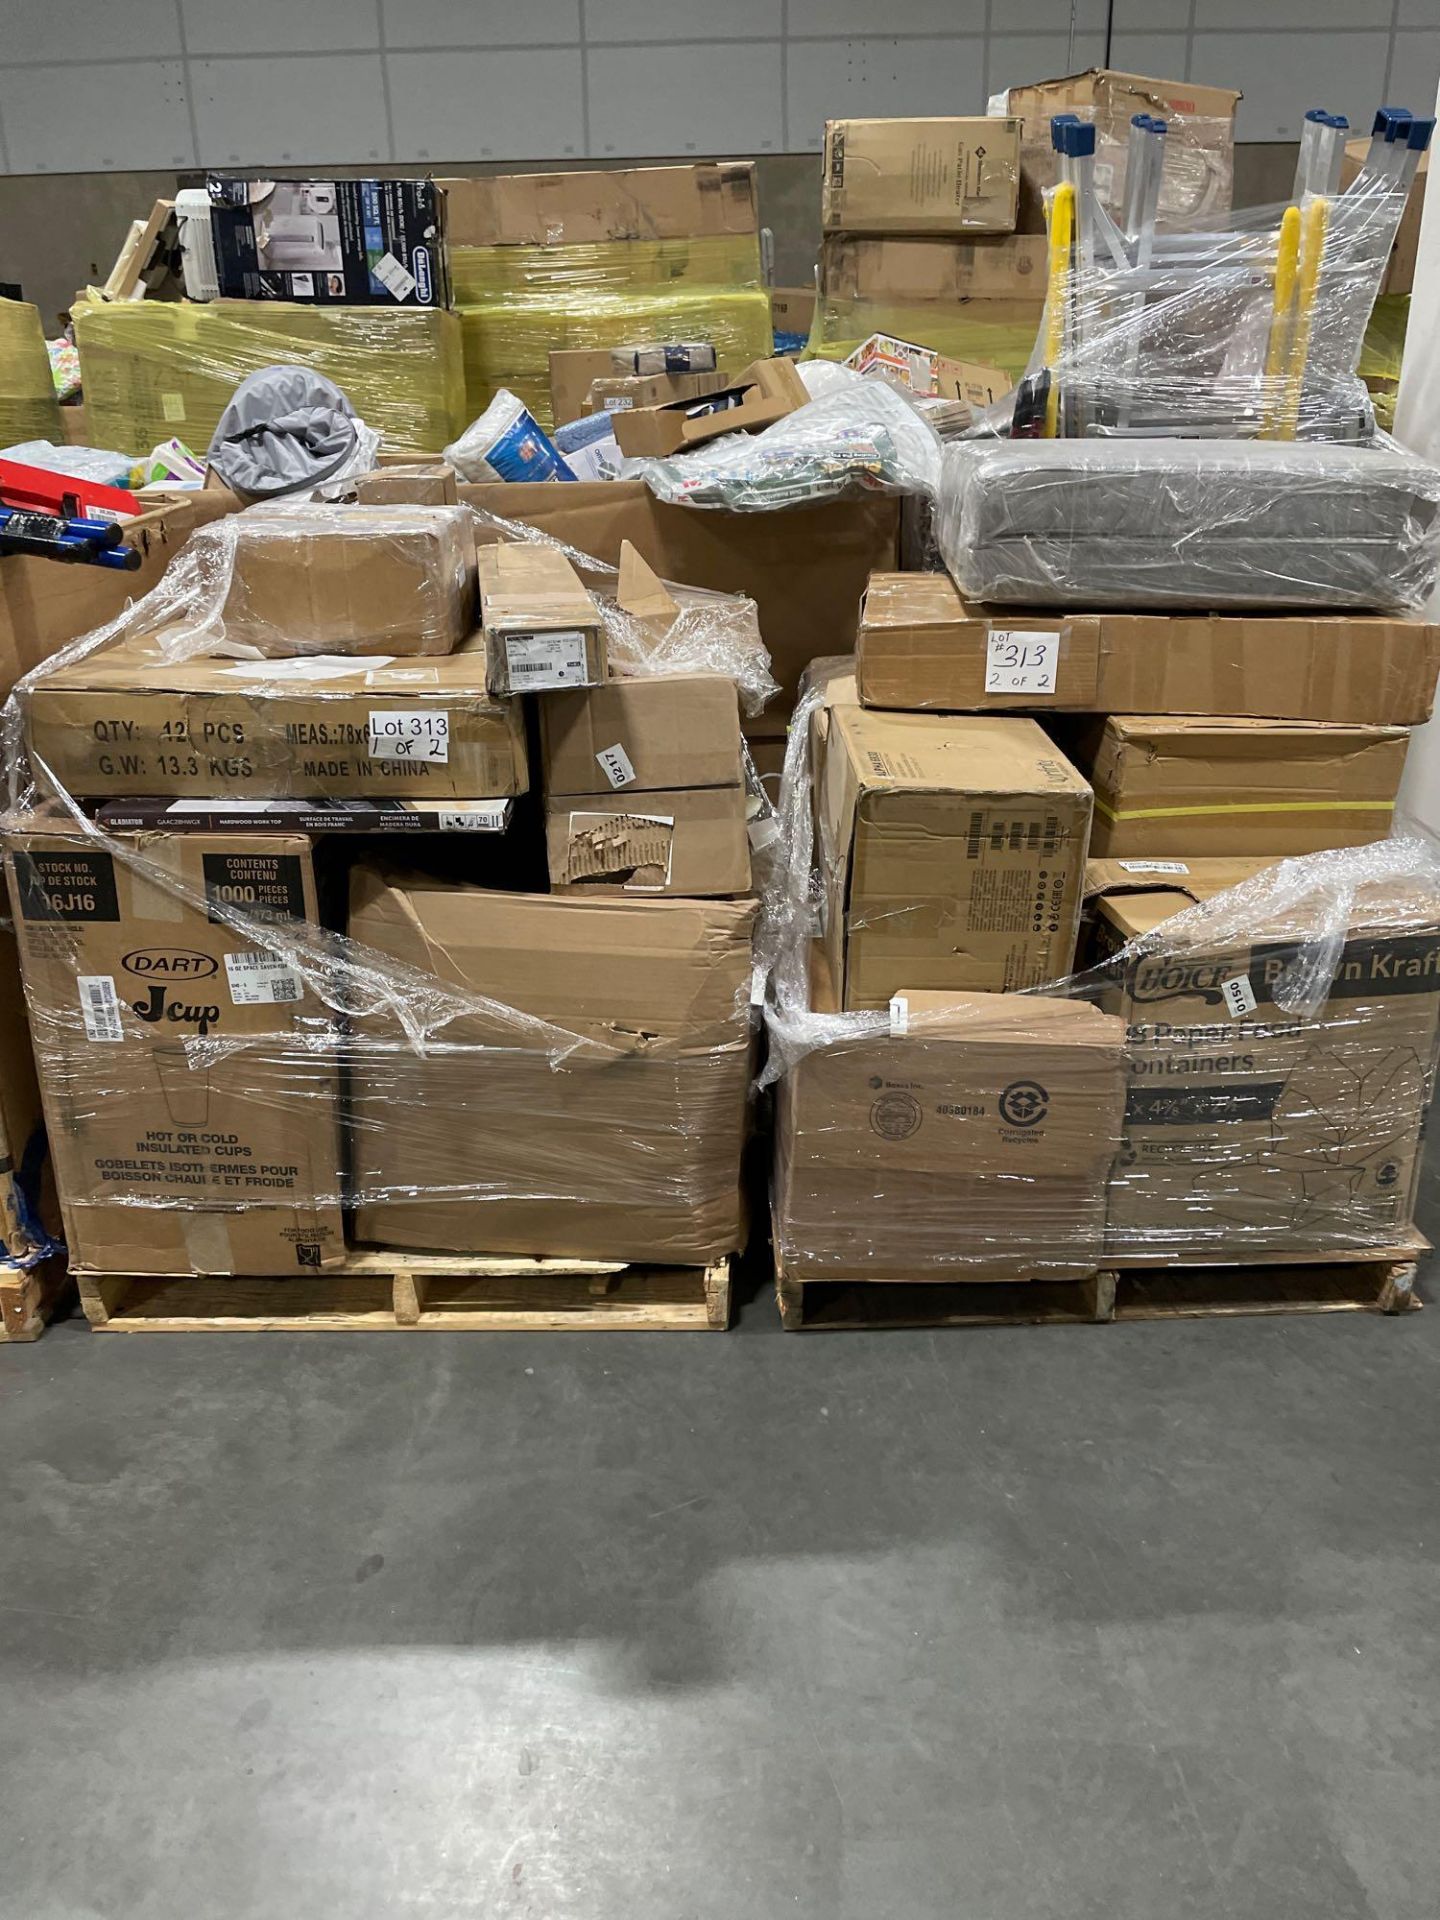 2 pallets, cups, xfinity by harman speakers, and more